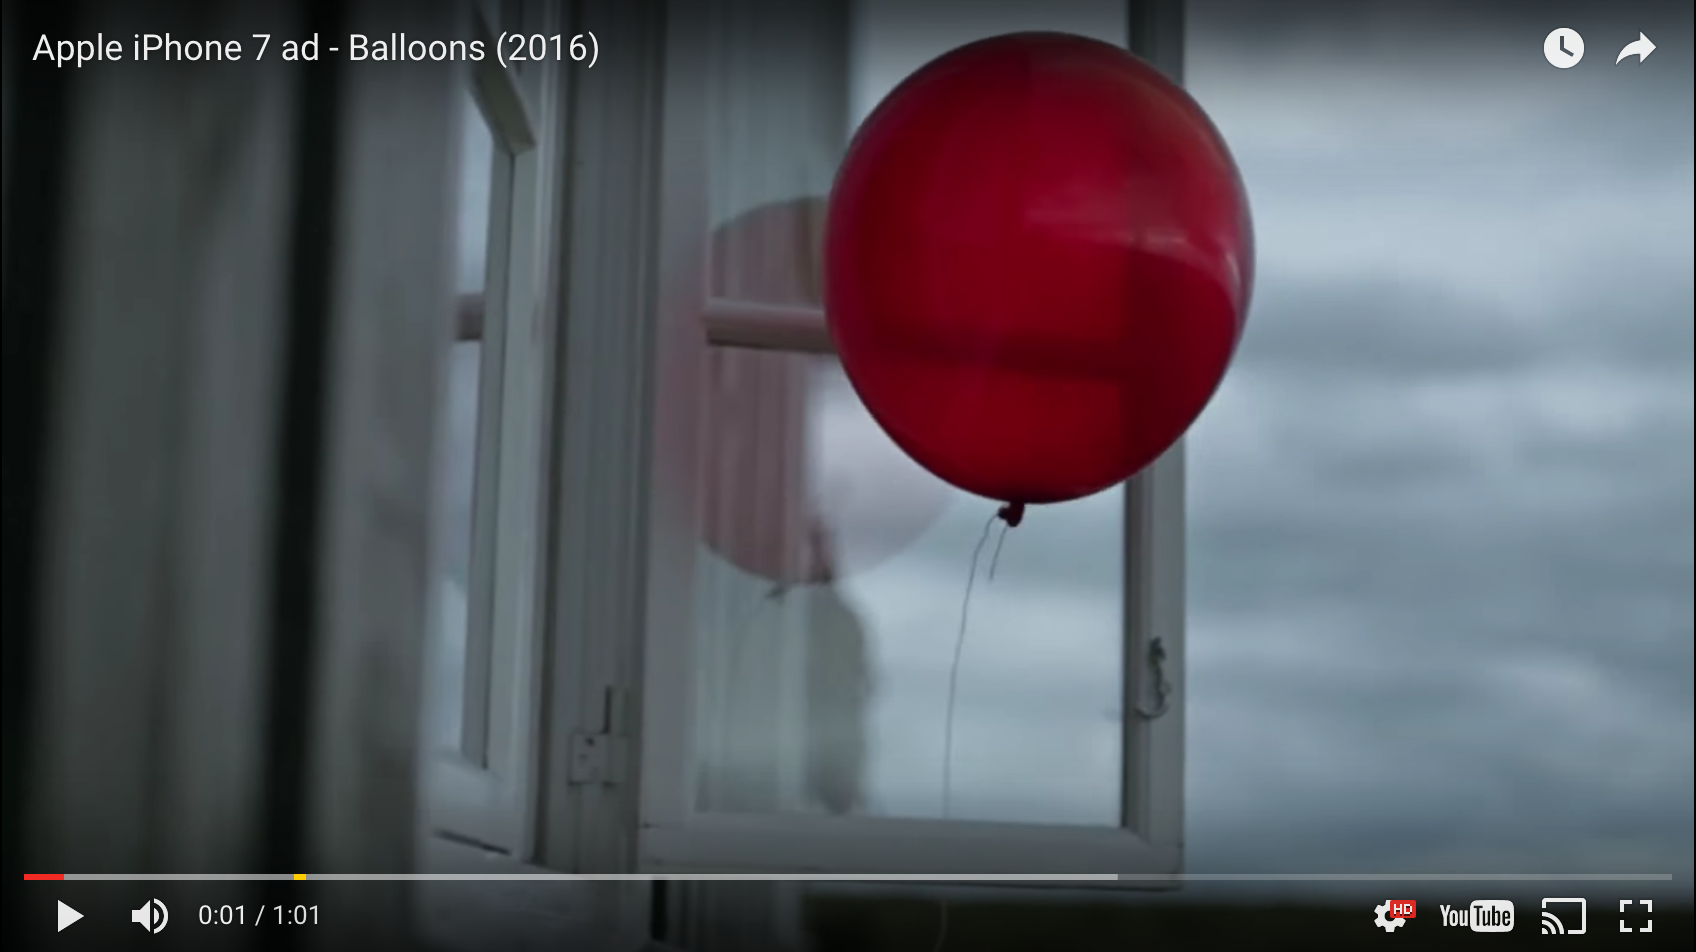 The Red Balloon tribute new Apple ad